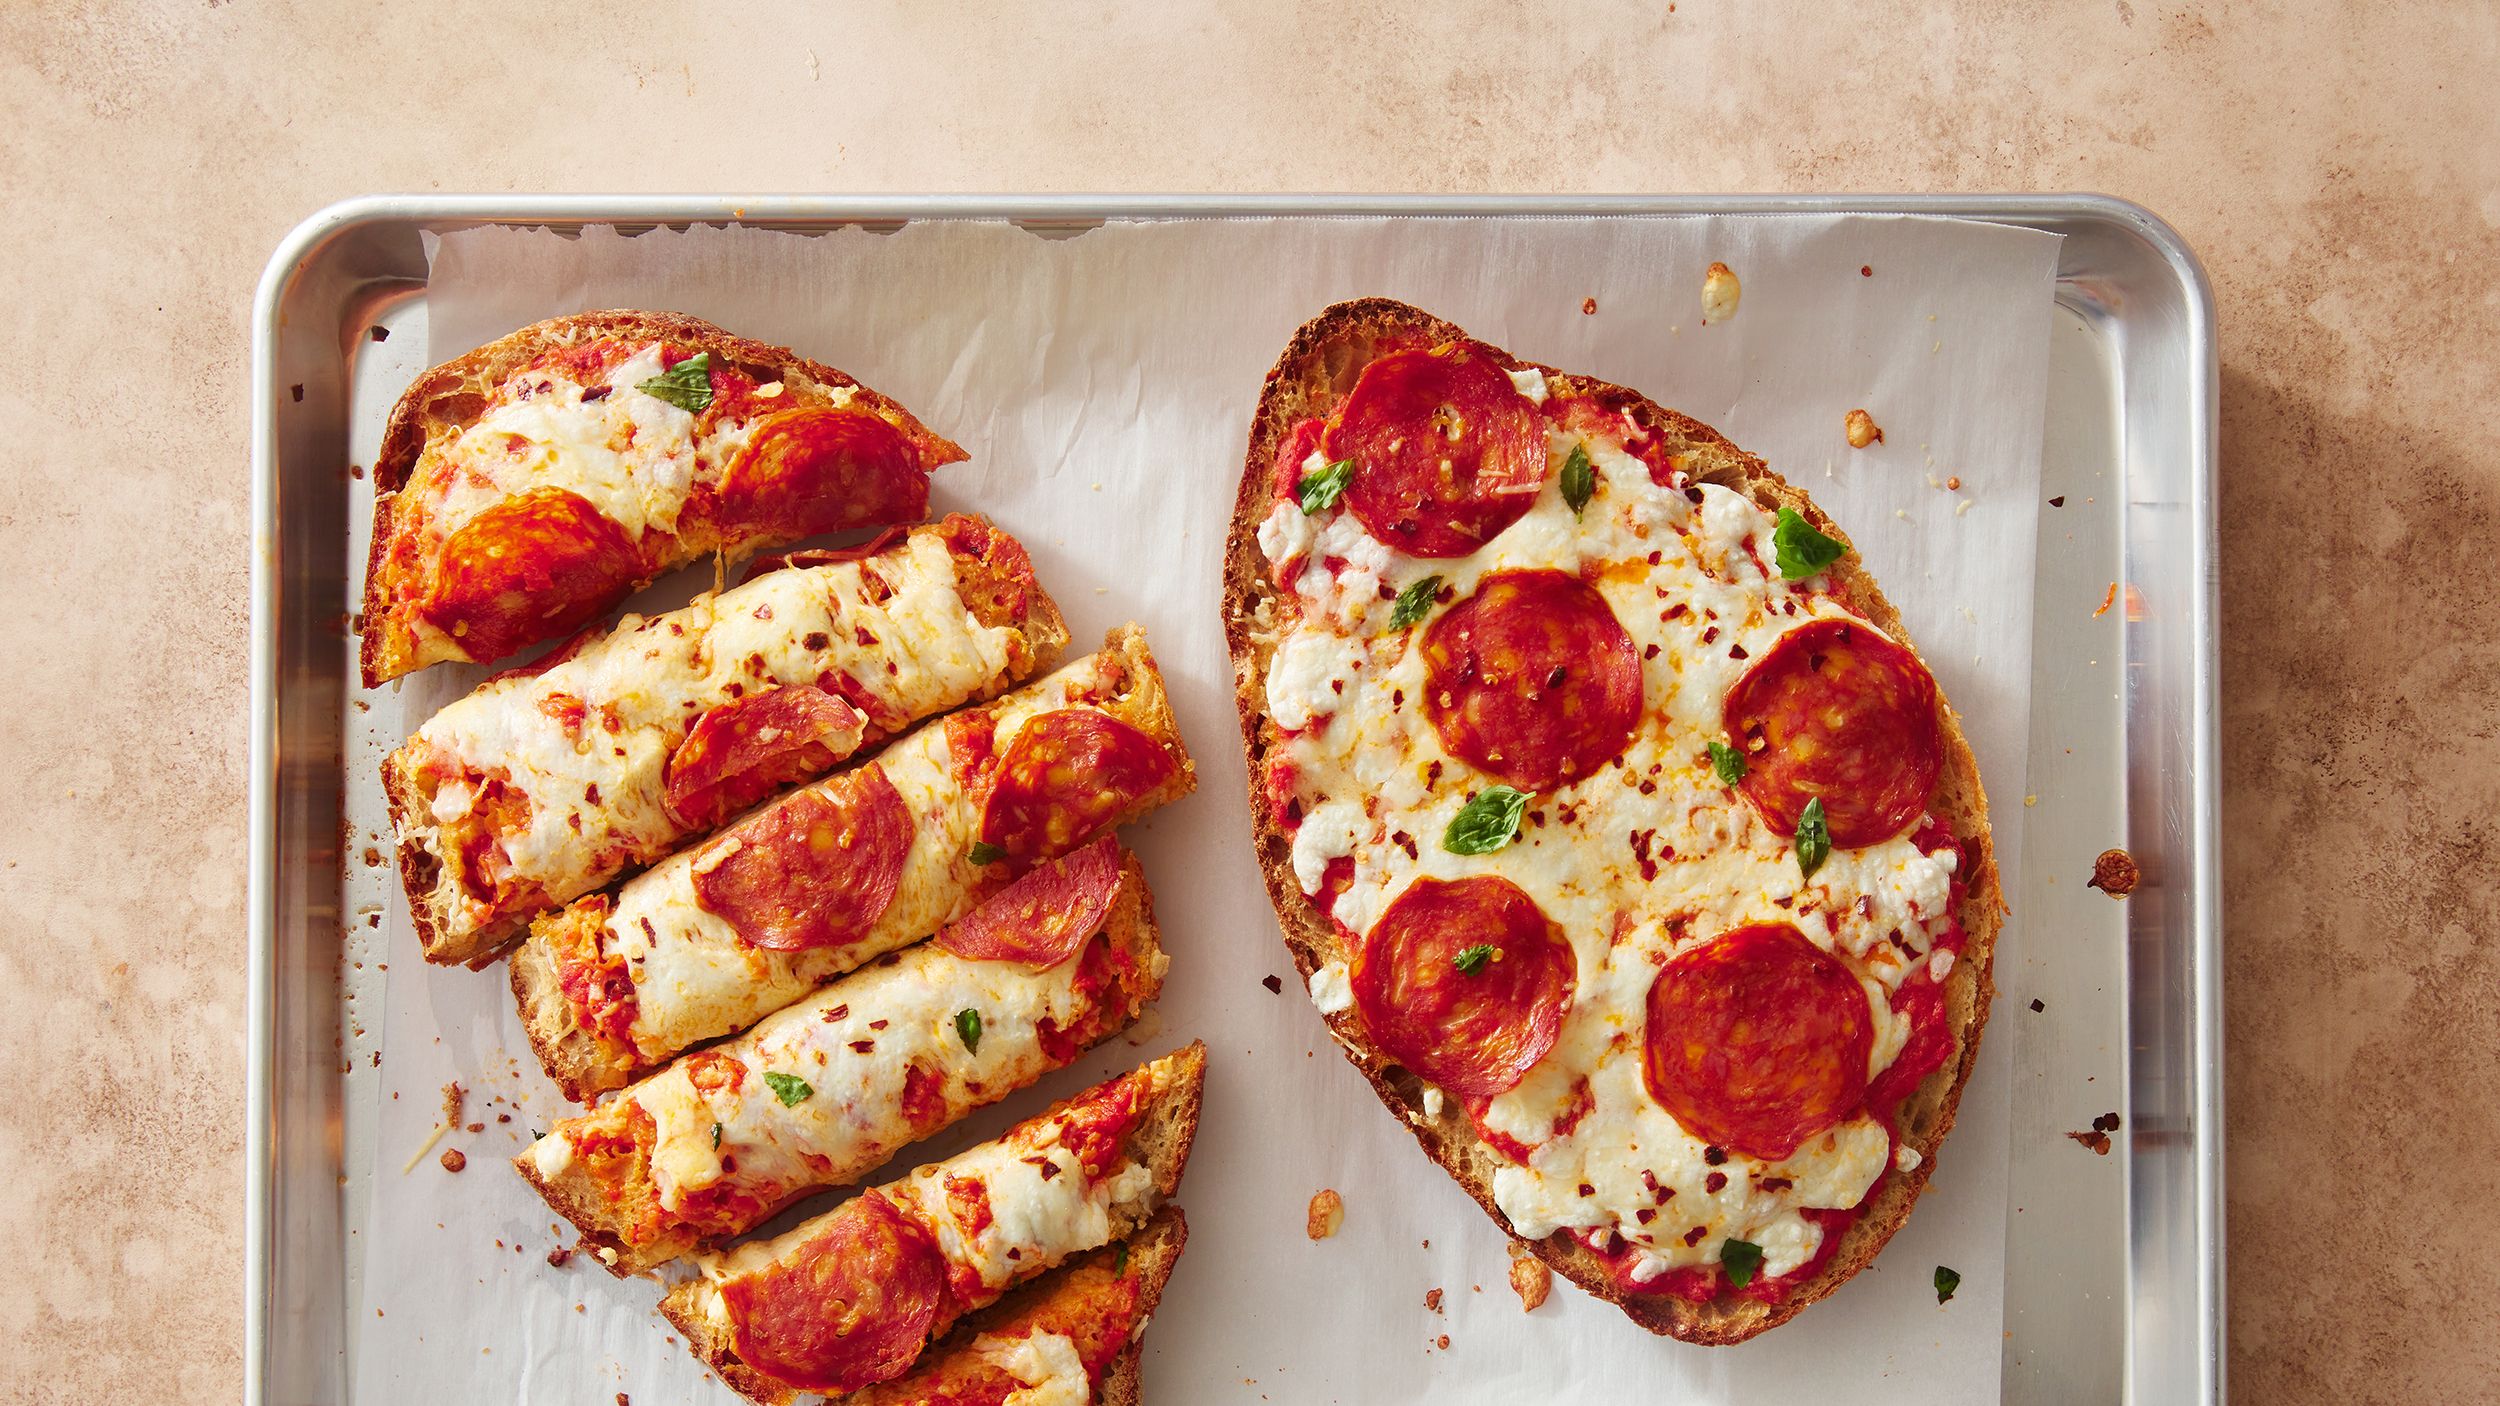 cheese french bread pizza